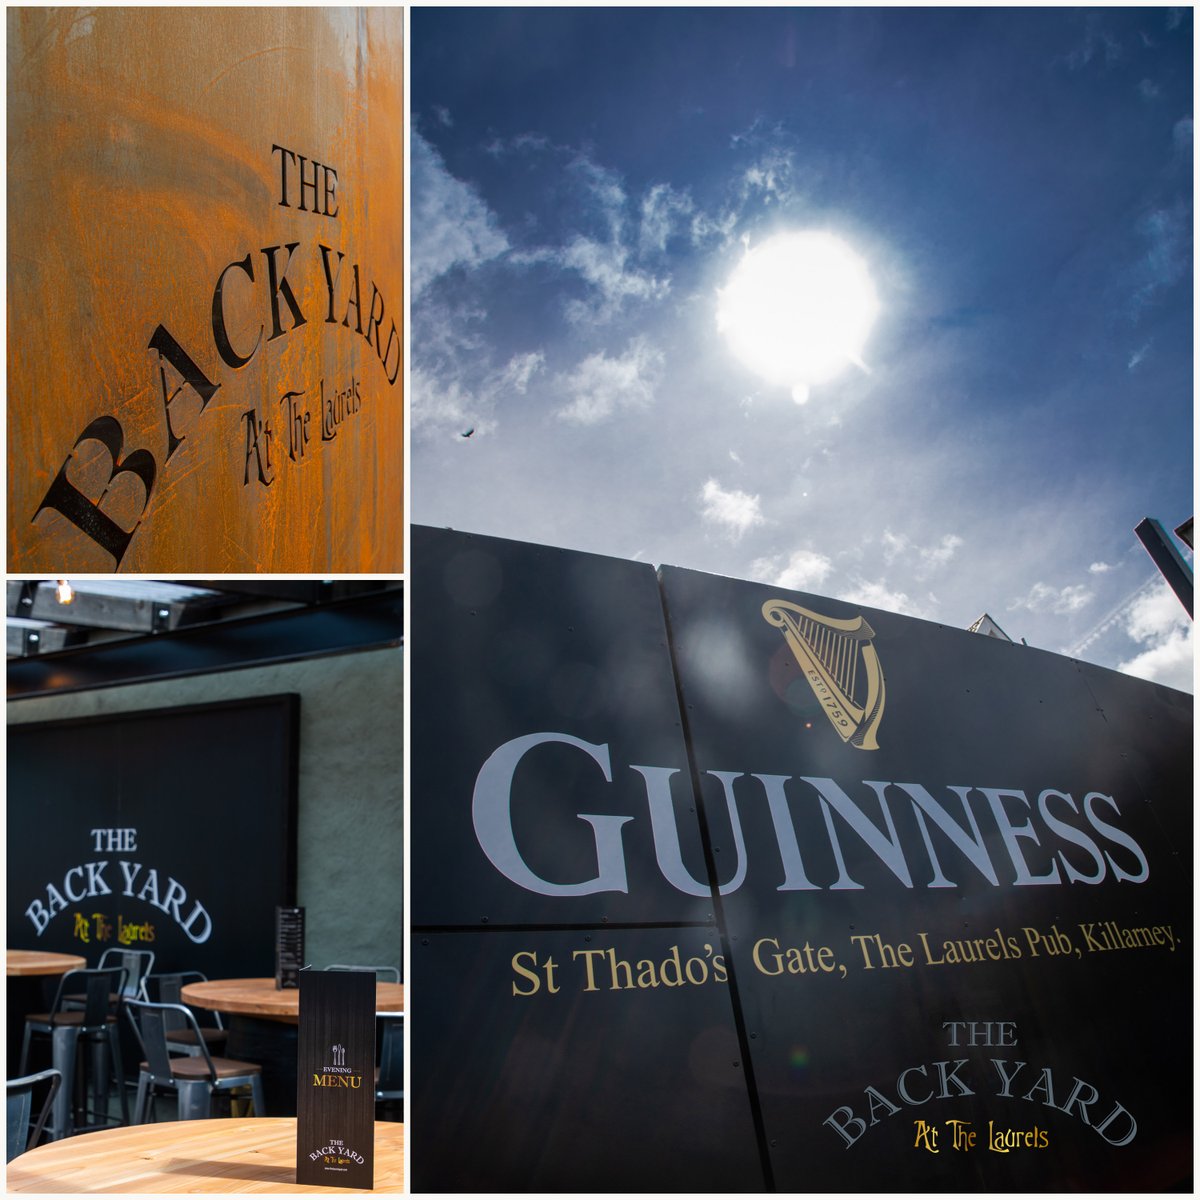 Happy Bank Holiday Monday, any plans come join us in The Back Yard ! It's going to be anothder fabulous day in Killarney no better spot to chill out and enjoy it. #thebackyard #thelaurelspub #outdoordining #lovekillarney #dinekillarney #tourismireland #irishpub #Guinness